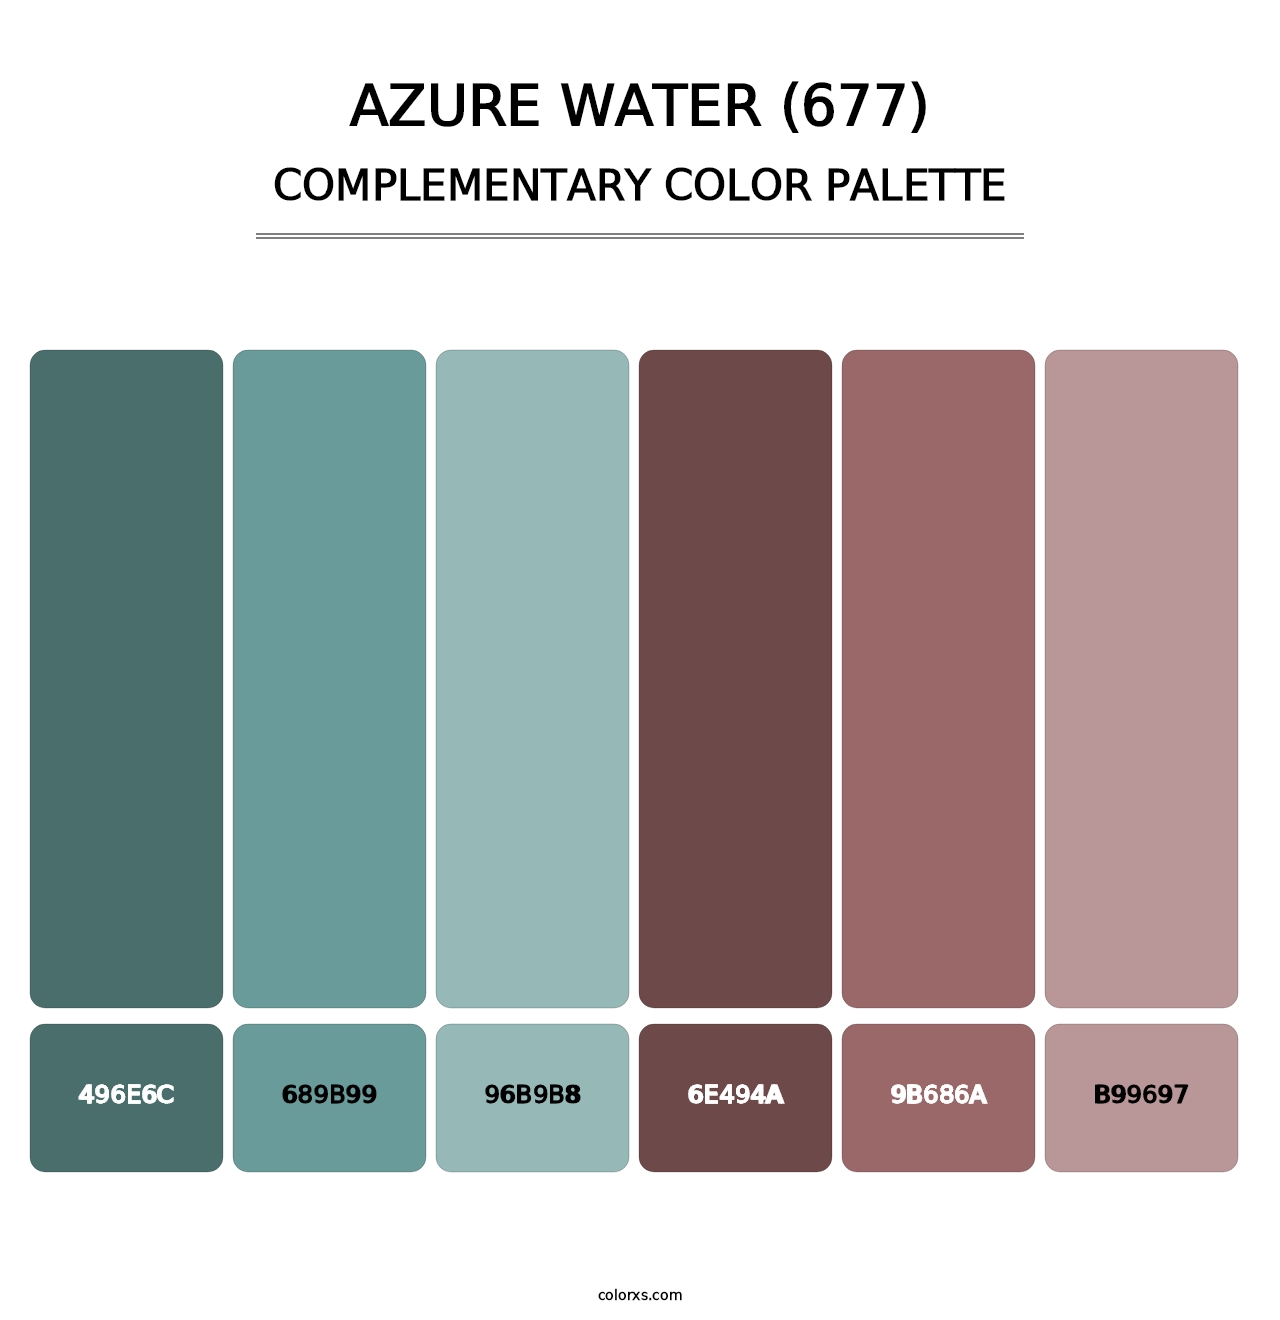 Azure Water (677) - Complementary Color Palette